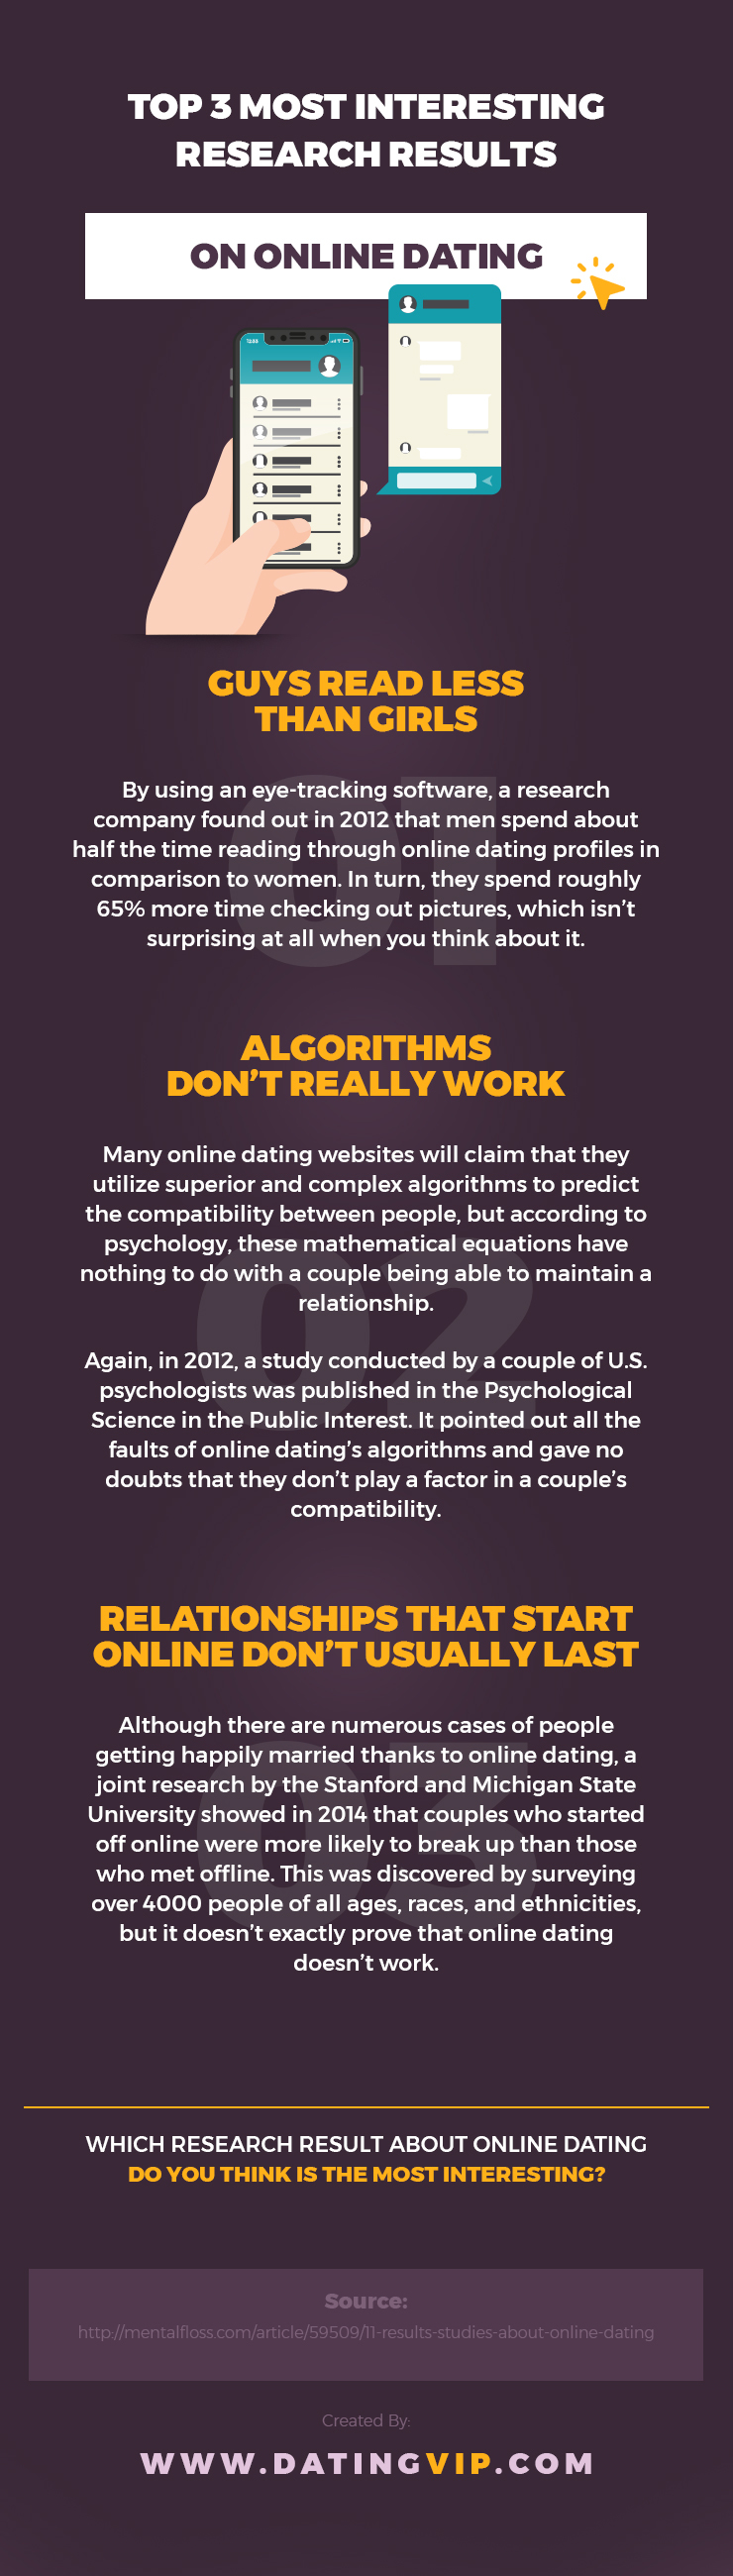 Top 3 Most Interesting Research Results on Online Dating